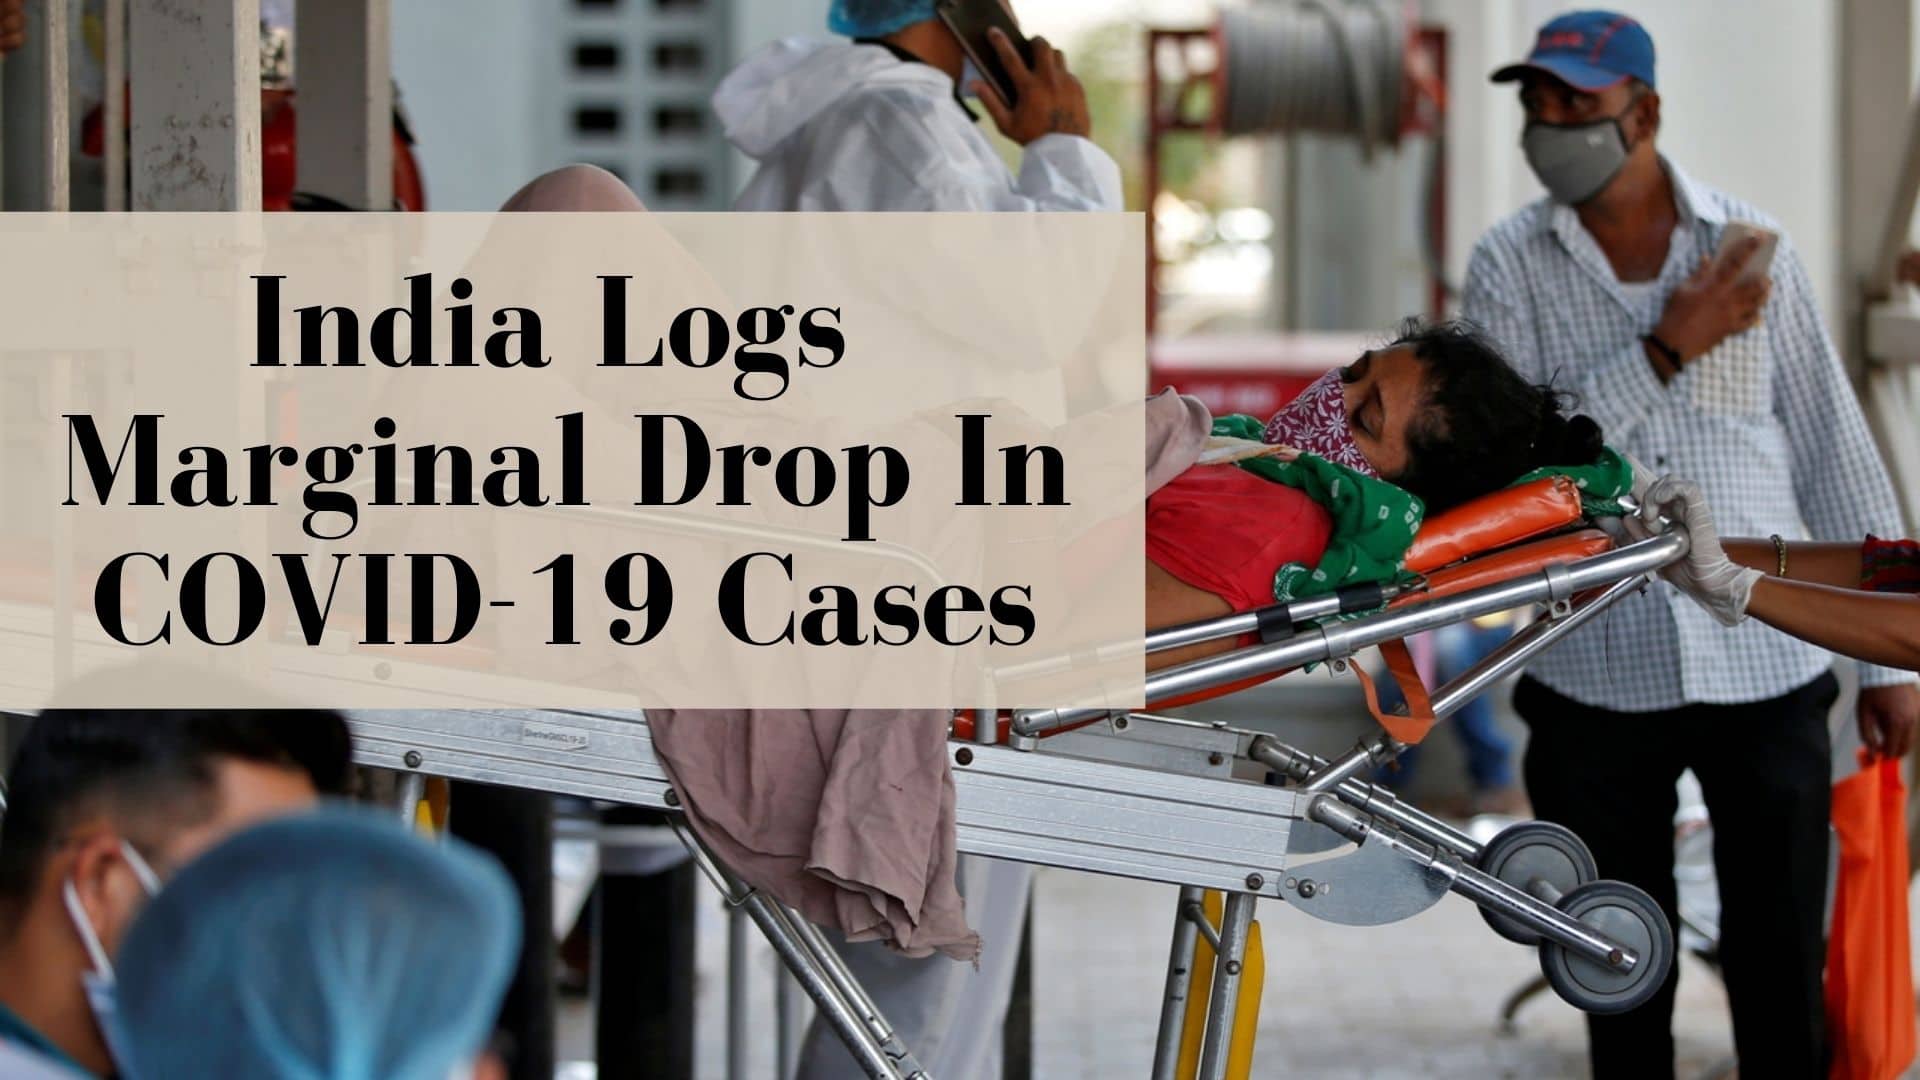 COVID-19 Live Updates: COVID Cases Drop In India, Country Logs 2.58 Lakh New Cases in 24Hours; Delhi, Bengal Sees A Dip In Daily Numbers Too